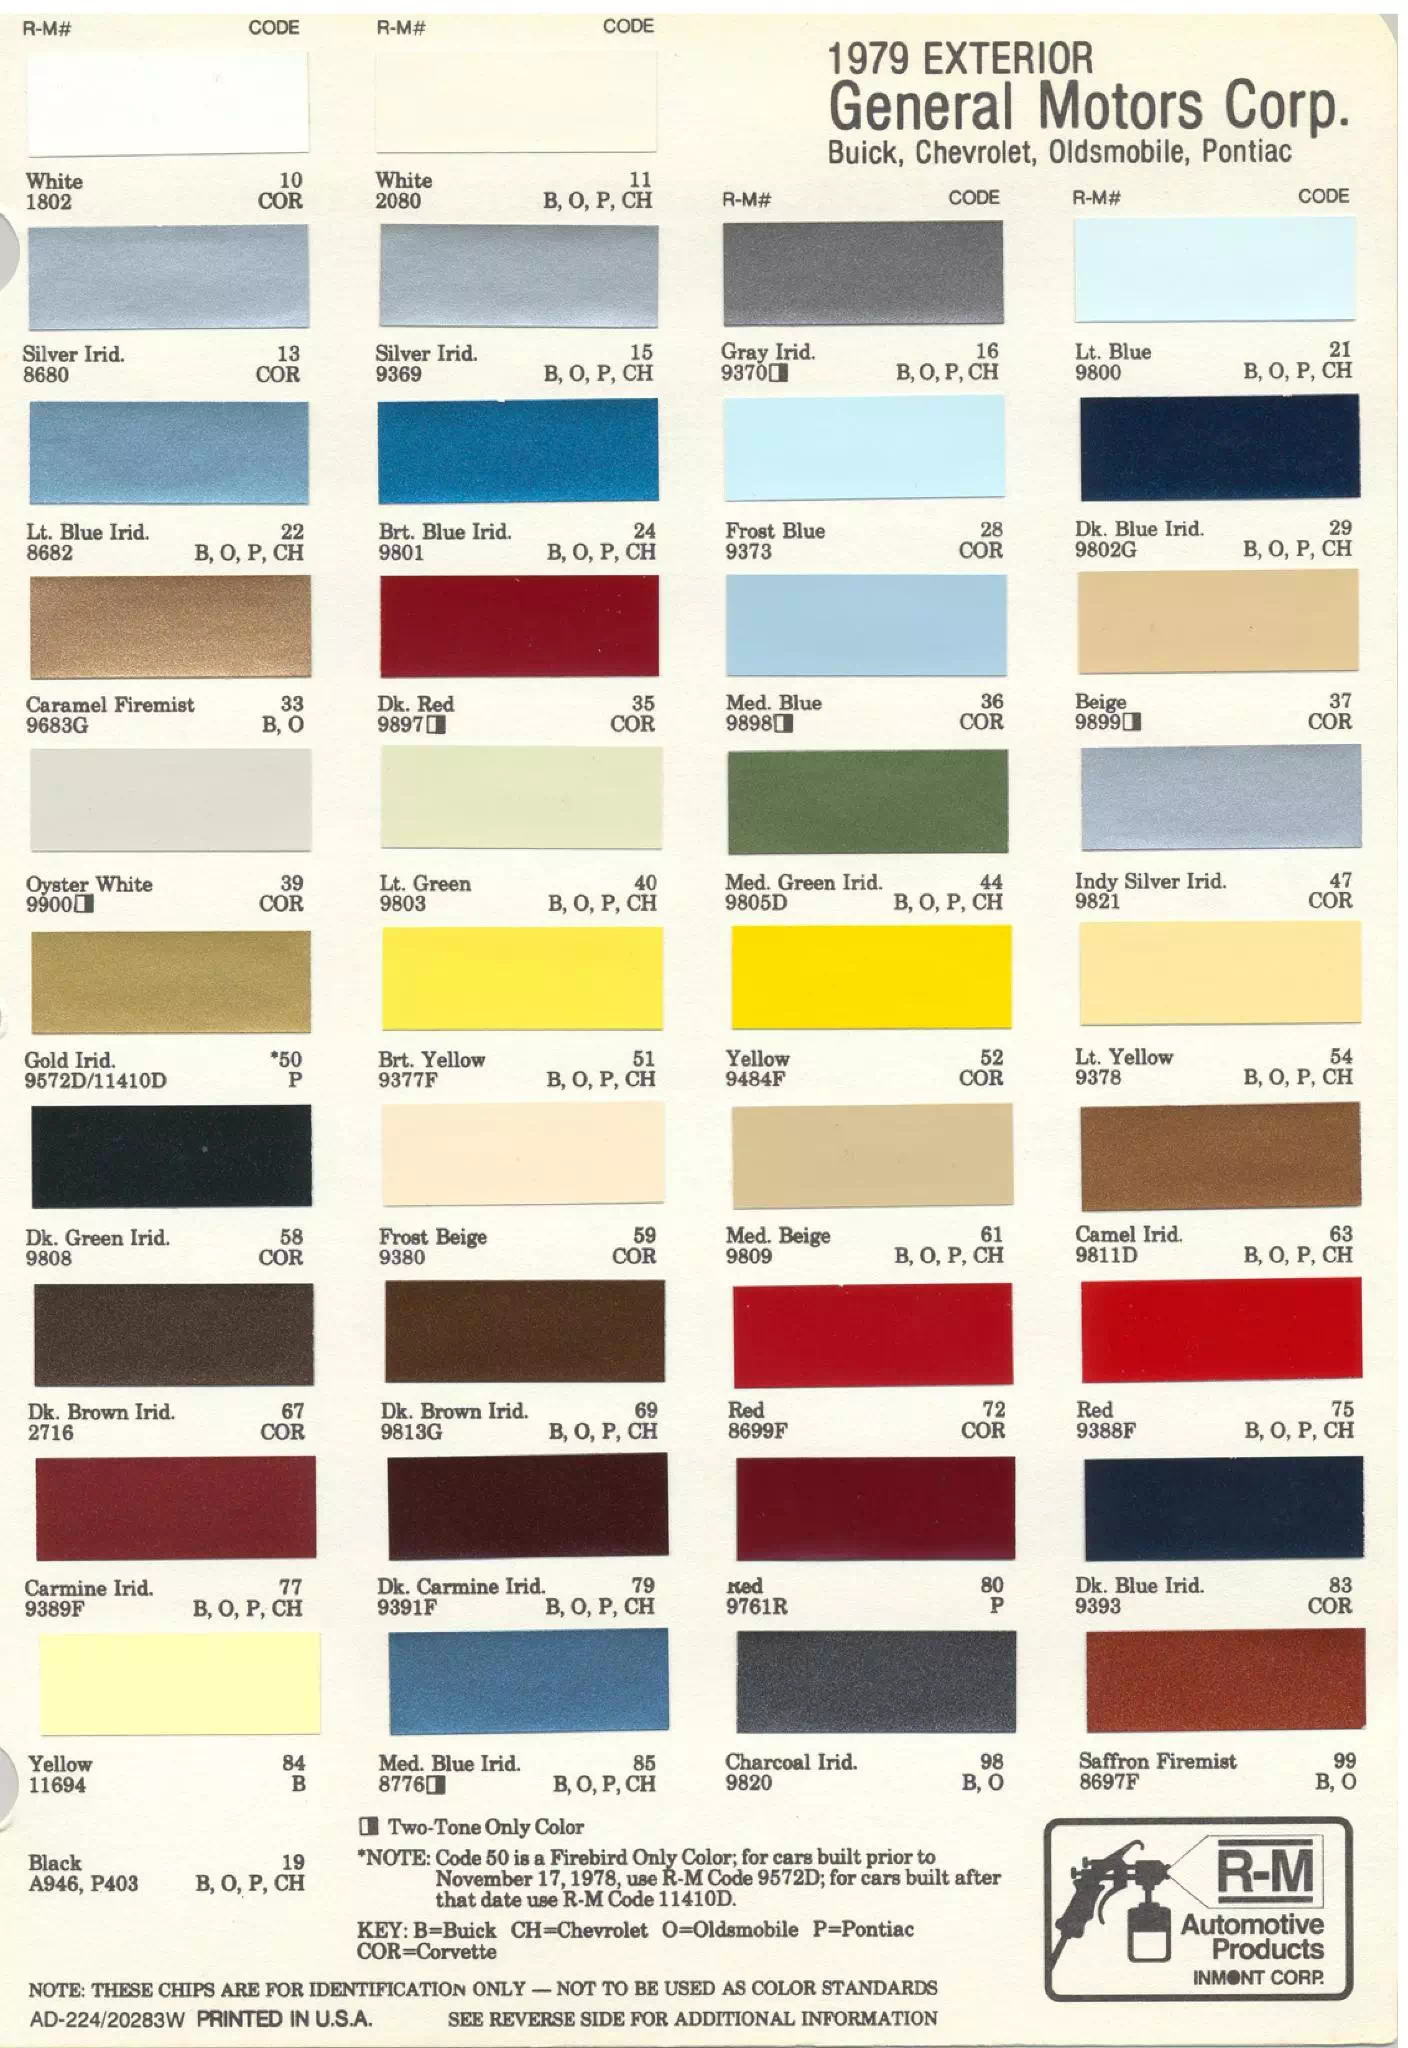 Colors, Descriptions, and Paint Swatches for General Motors Vehicles in 1979